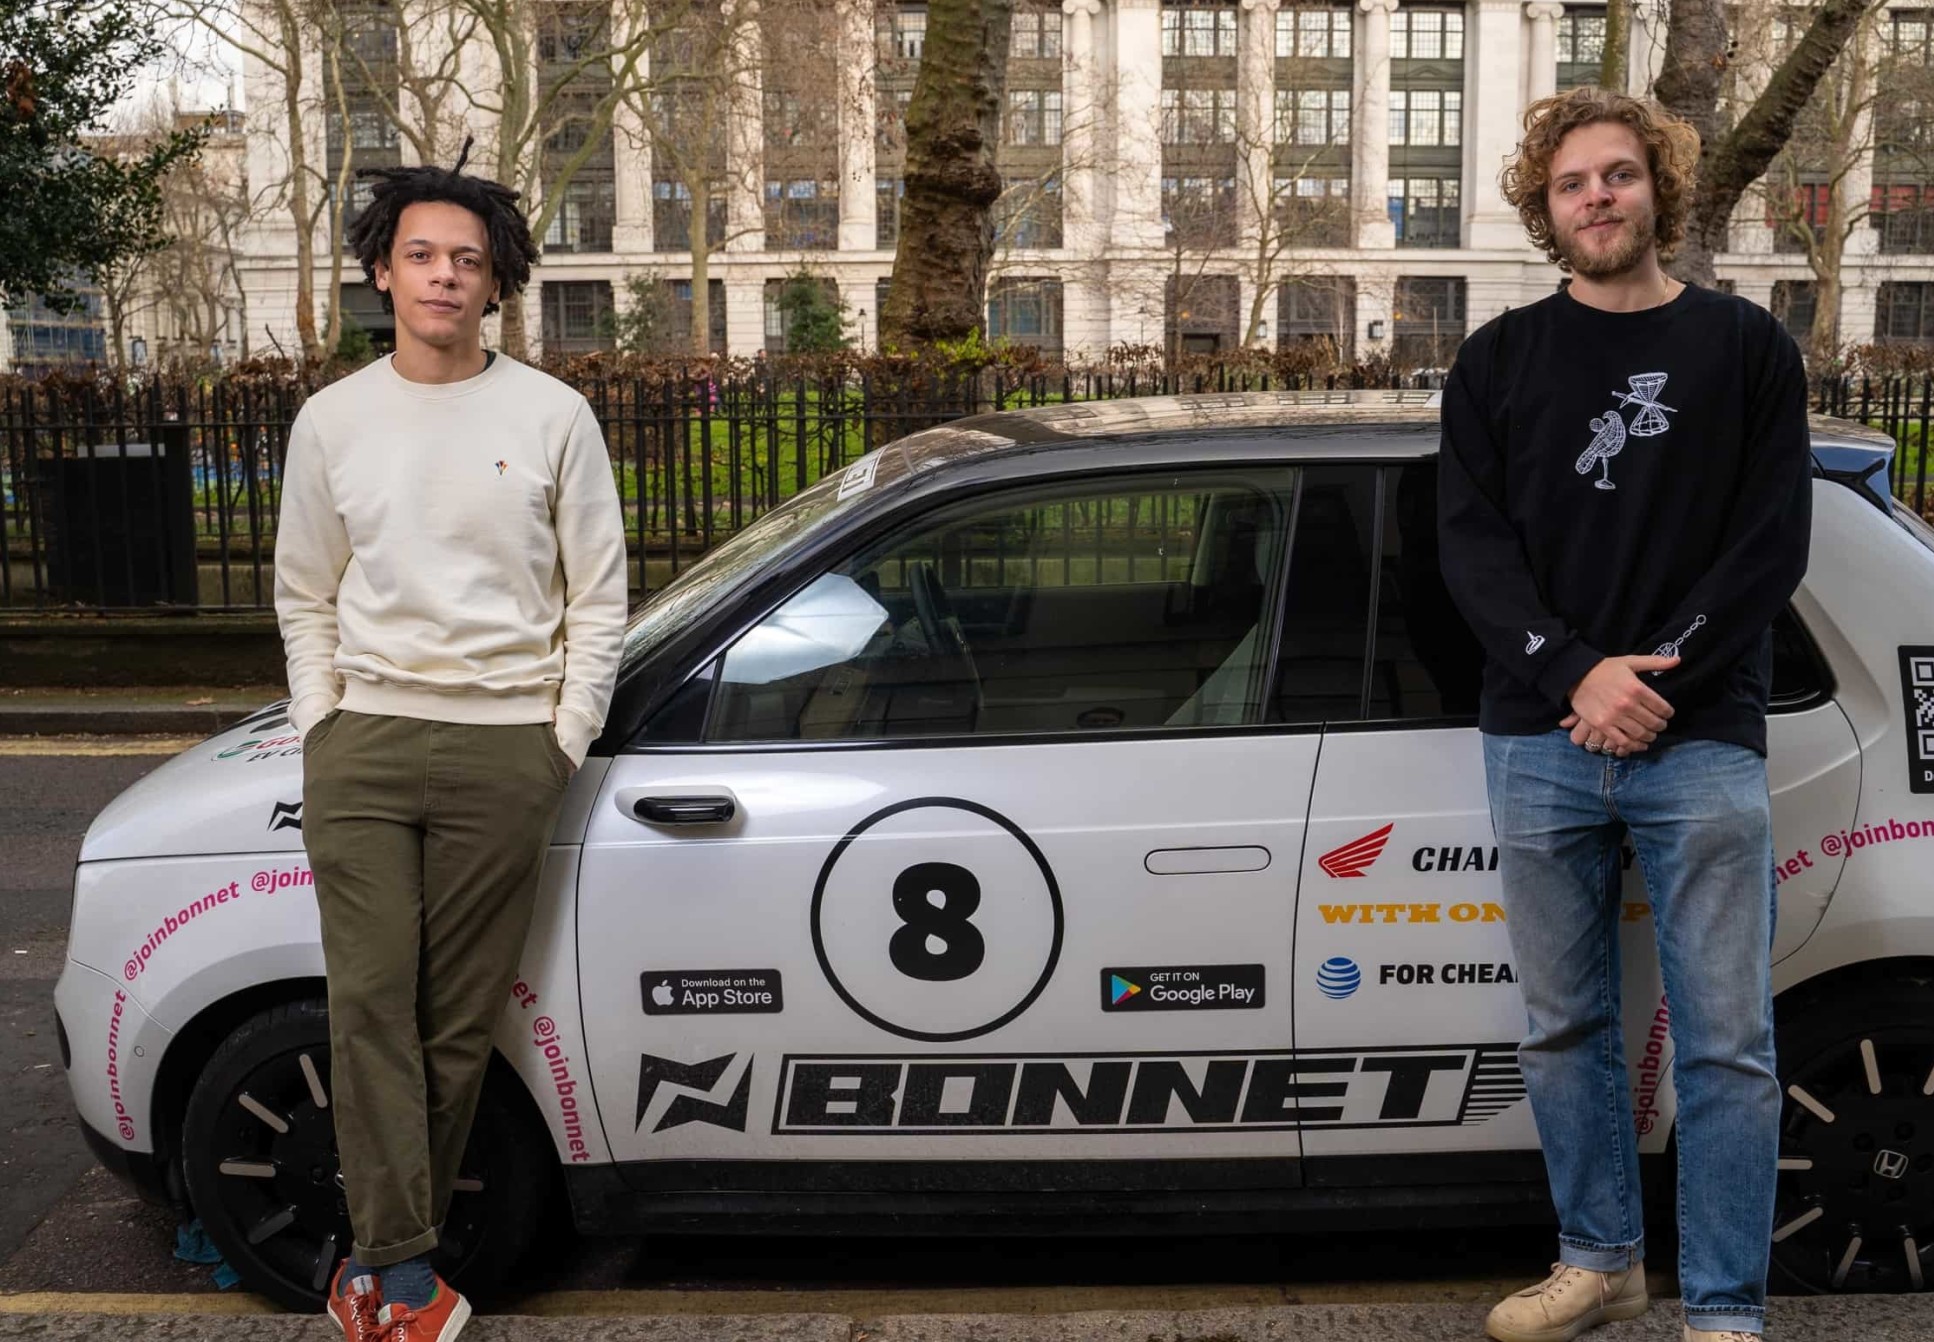 Bonnet founders with an electric car